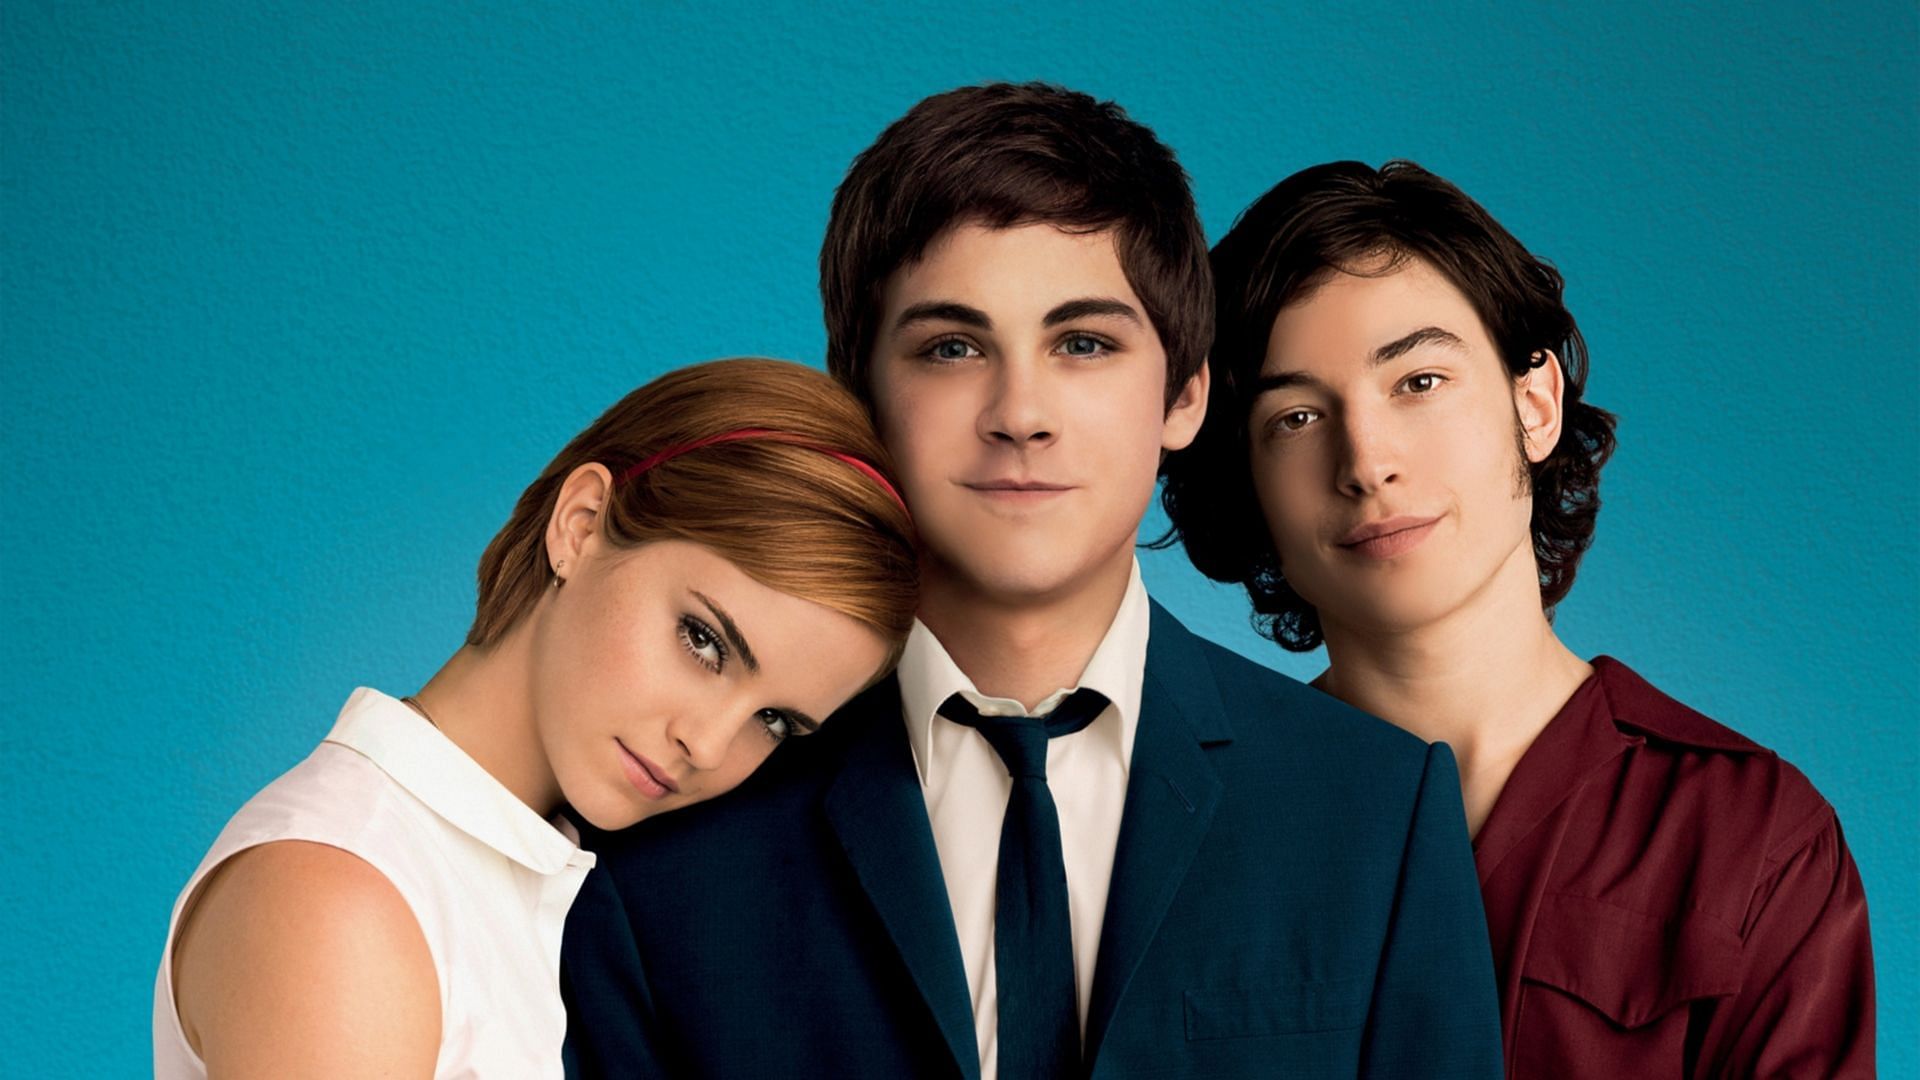 Why All Teens Should Watch The Perks of Being a Wallflower – The